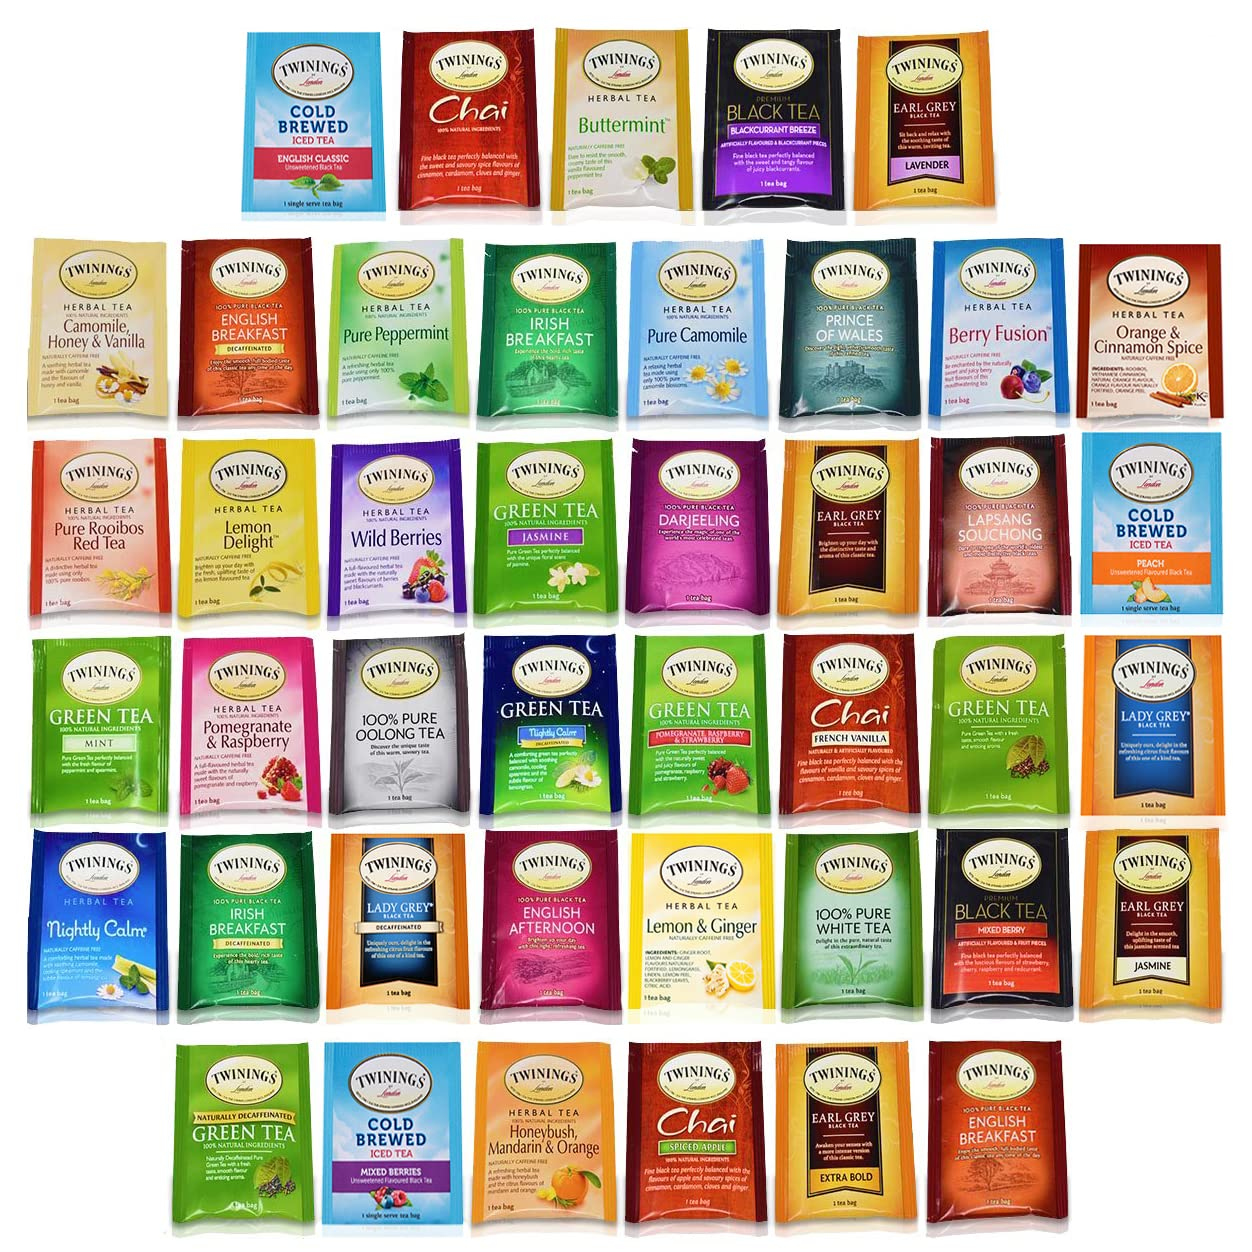 Twinings Tea Bags Sampler Assortment Variety Pack Gift Box - 48 Count - Perfect Variety - English Breakfast, Green, Black, Herbal, Chai Tea and More